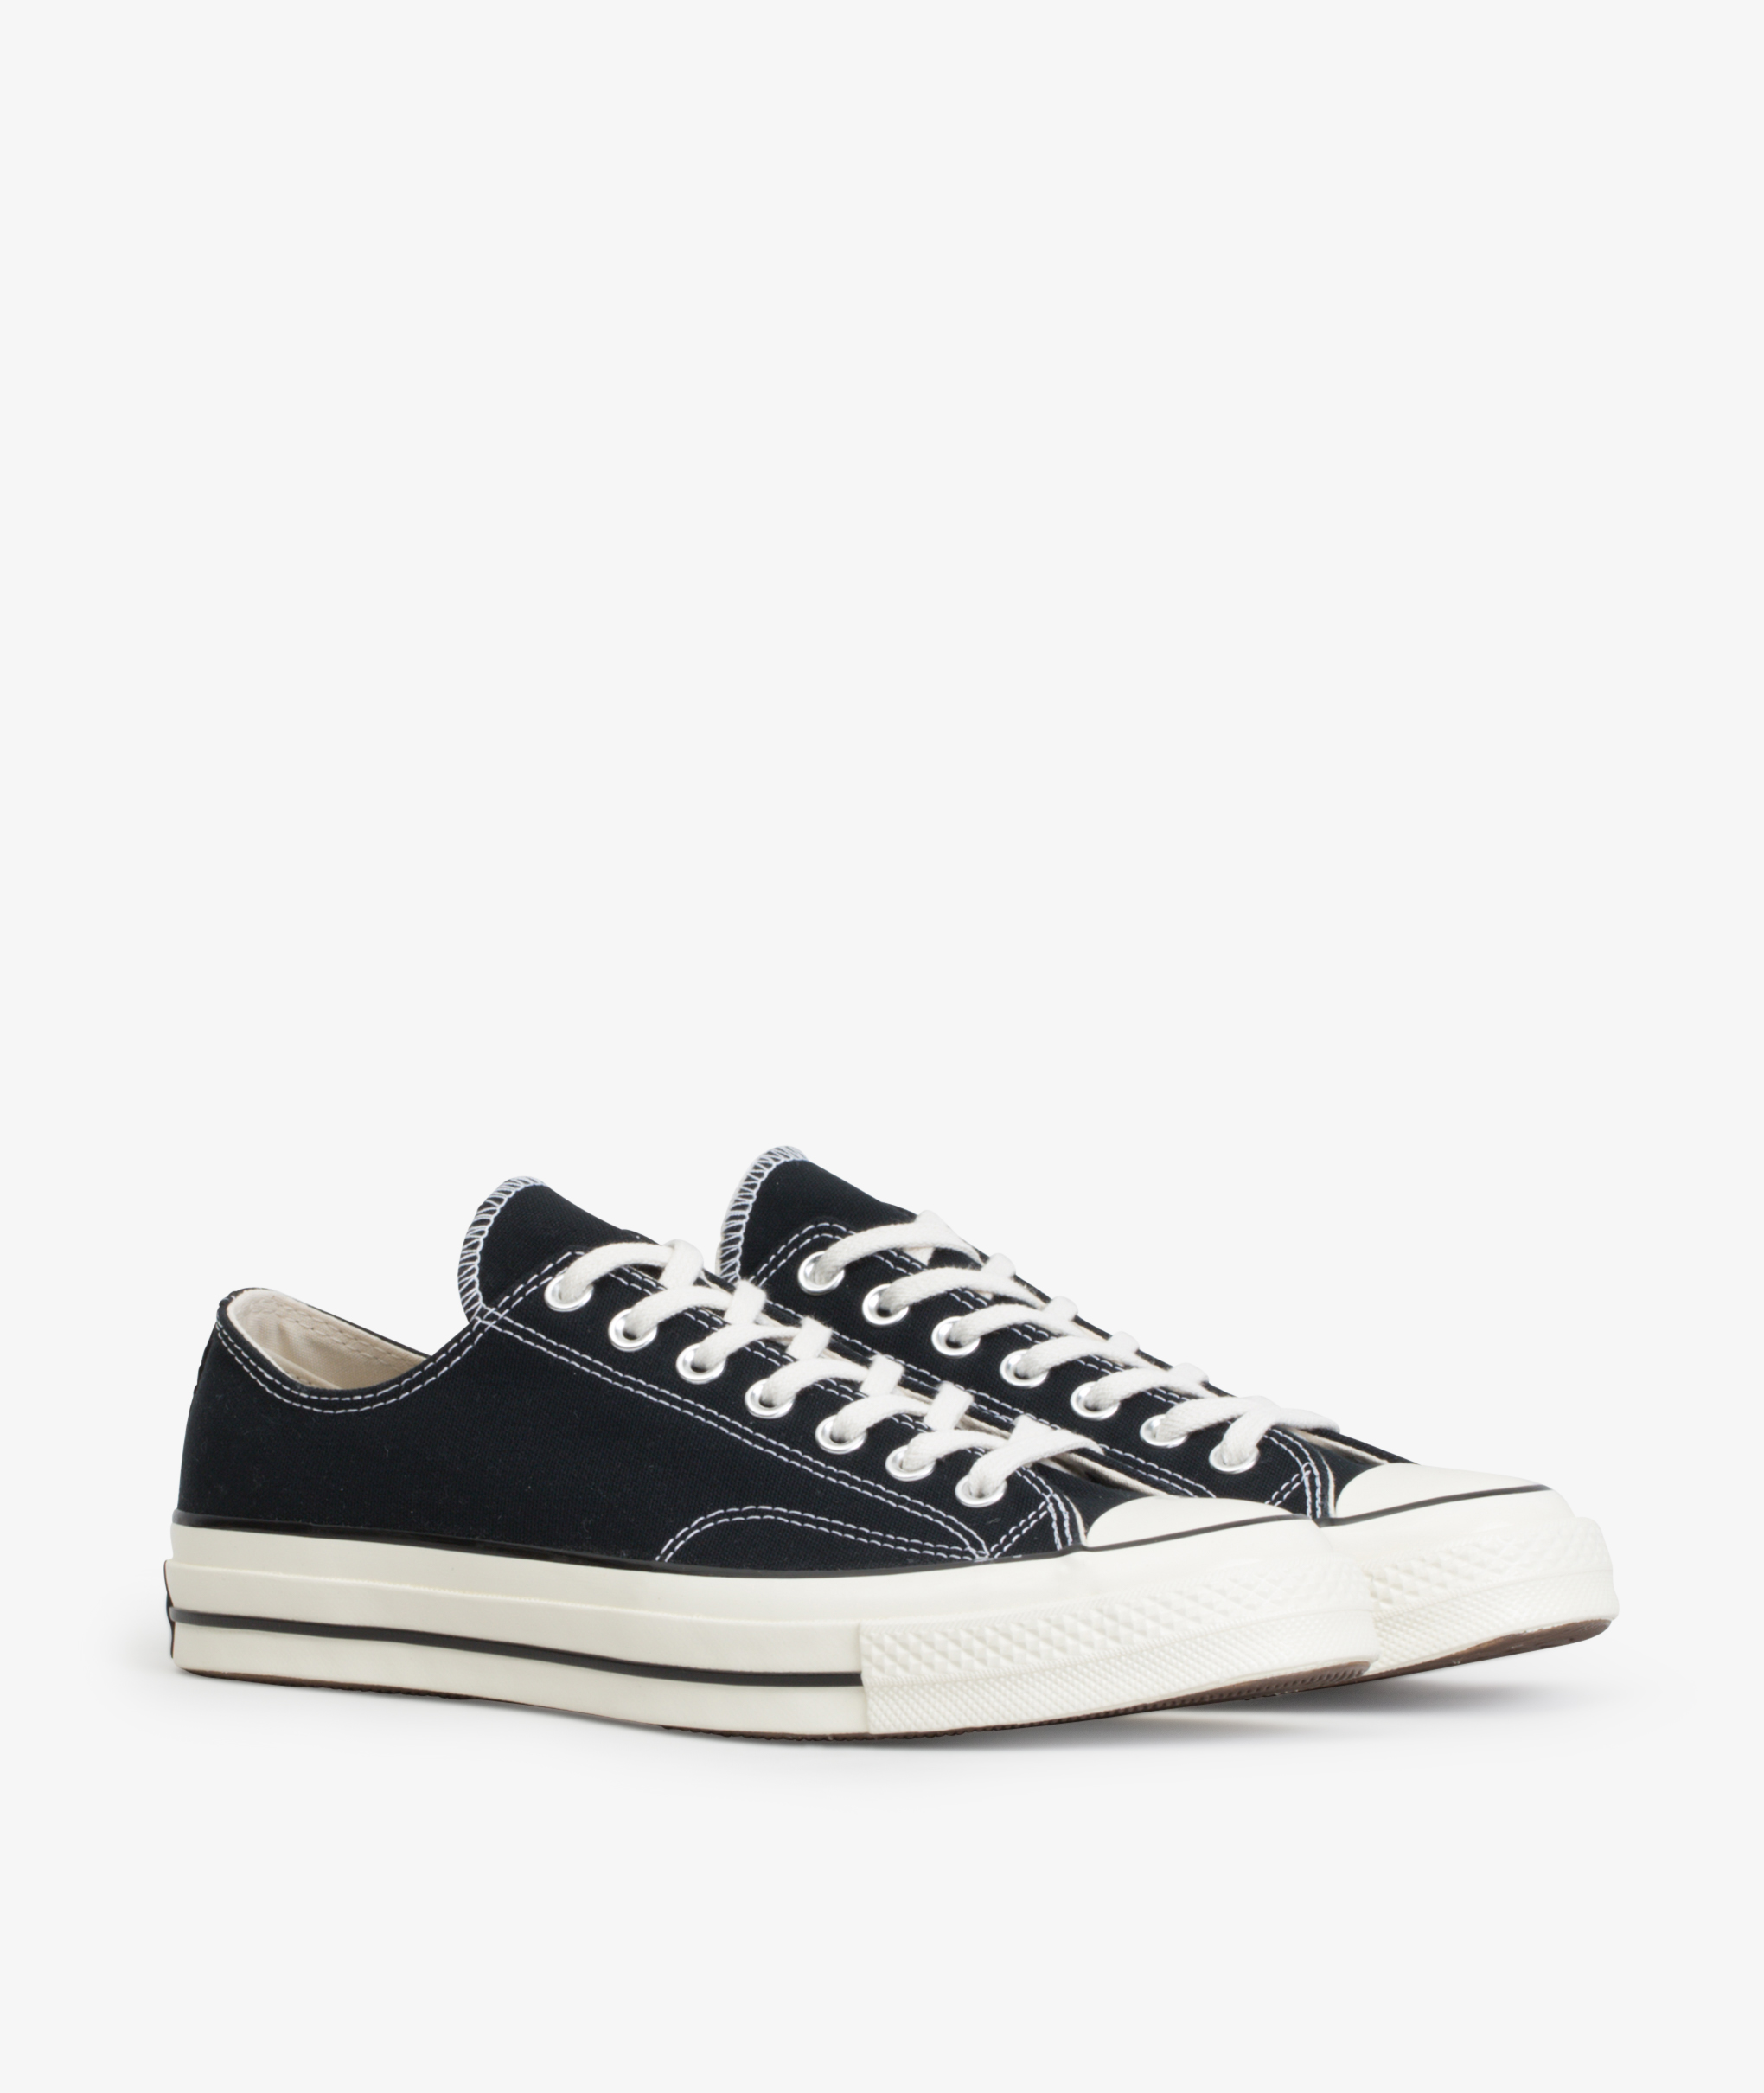 converse chuck taylor all star low 1970 vintage ox